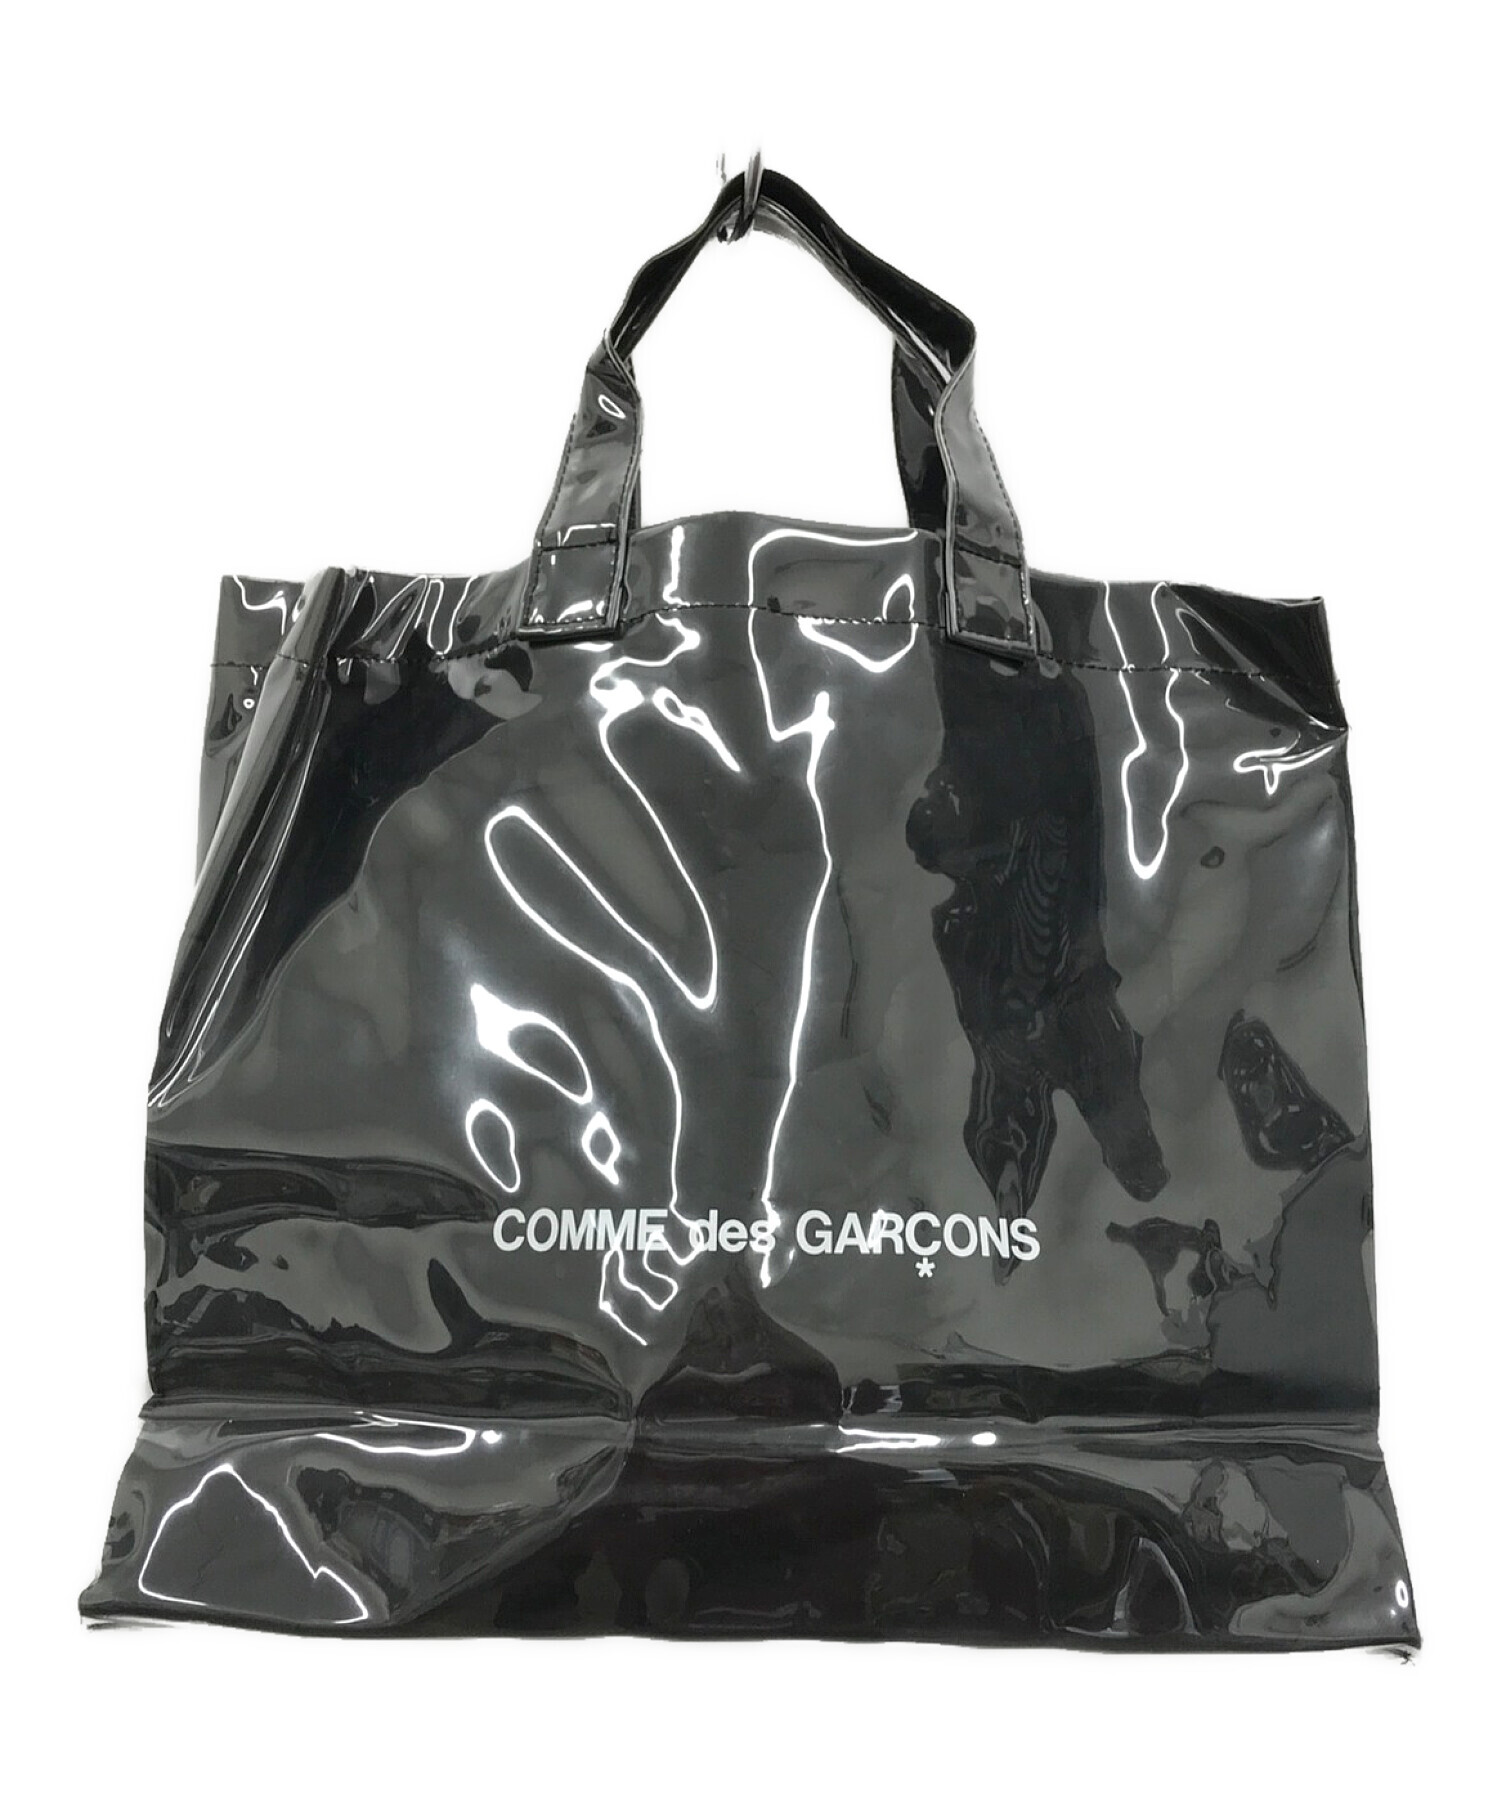 COMME des GARCONS PVCトートバッグ コムデギャルソン